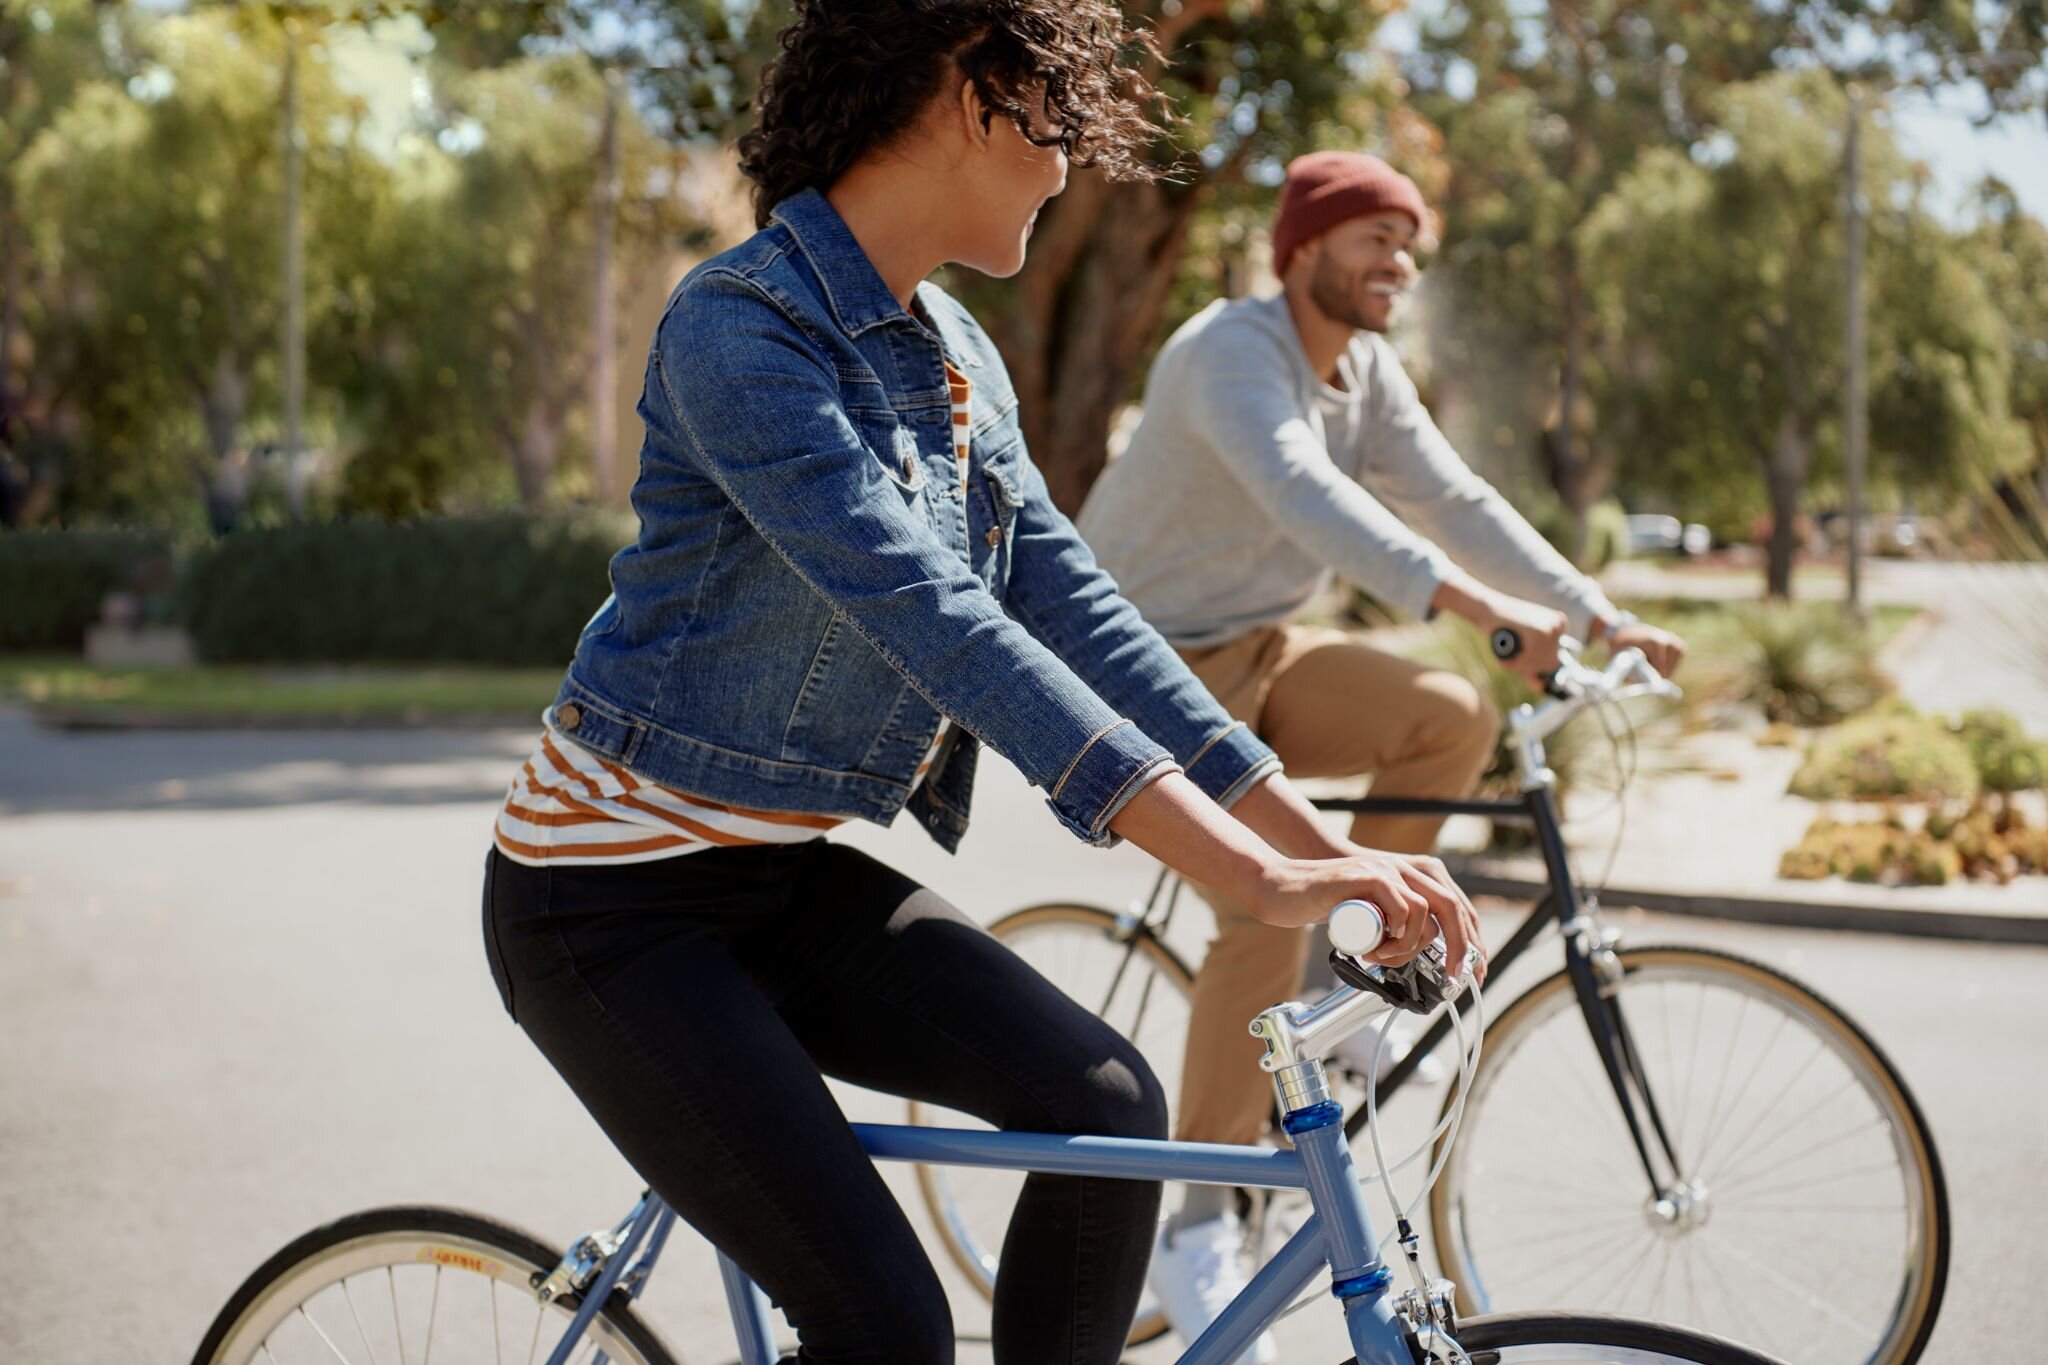 Nothing says &lsquo;spring&rsquo; in #Parkmerced like taking a bike ride through the lush  grounds. 
-
-
-
-
-
🏷
#sanfran #sanfransico #sanfranapartment #sanfranrental #apartment #rental #apartmentliving #sfsu #bikeride #springactivities #apartmentl